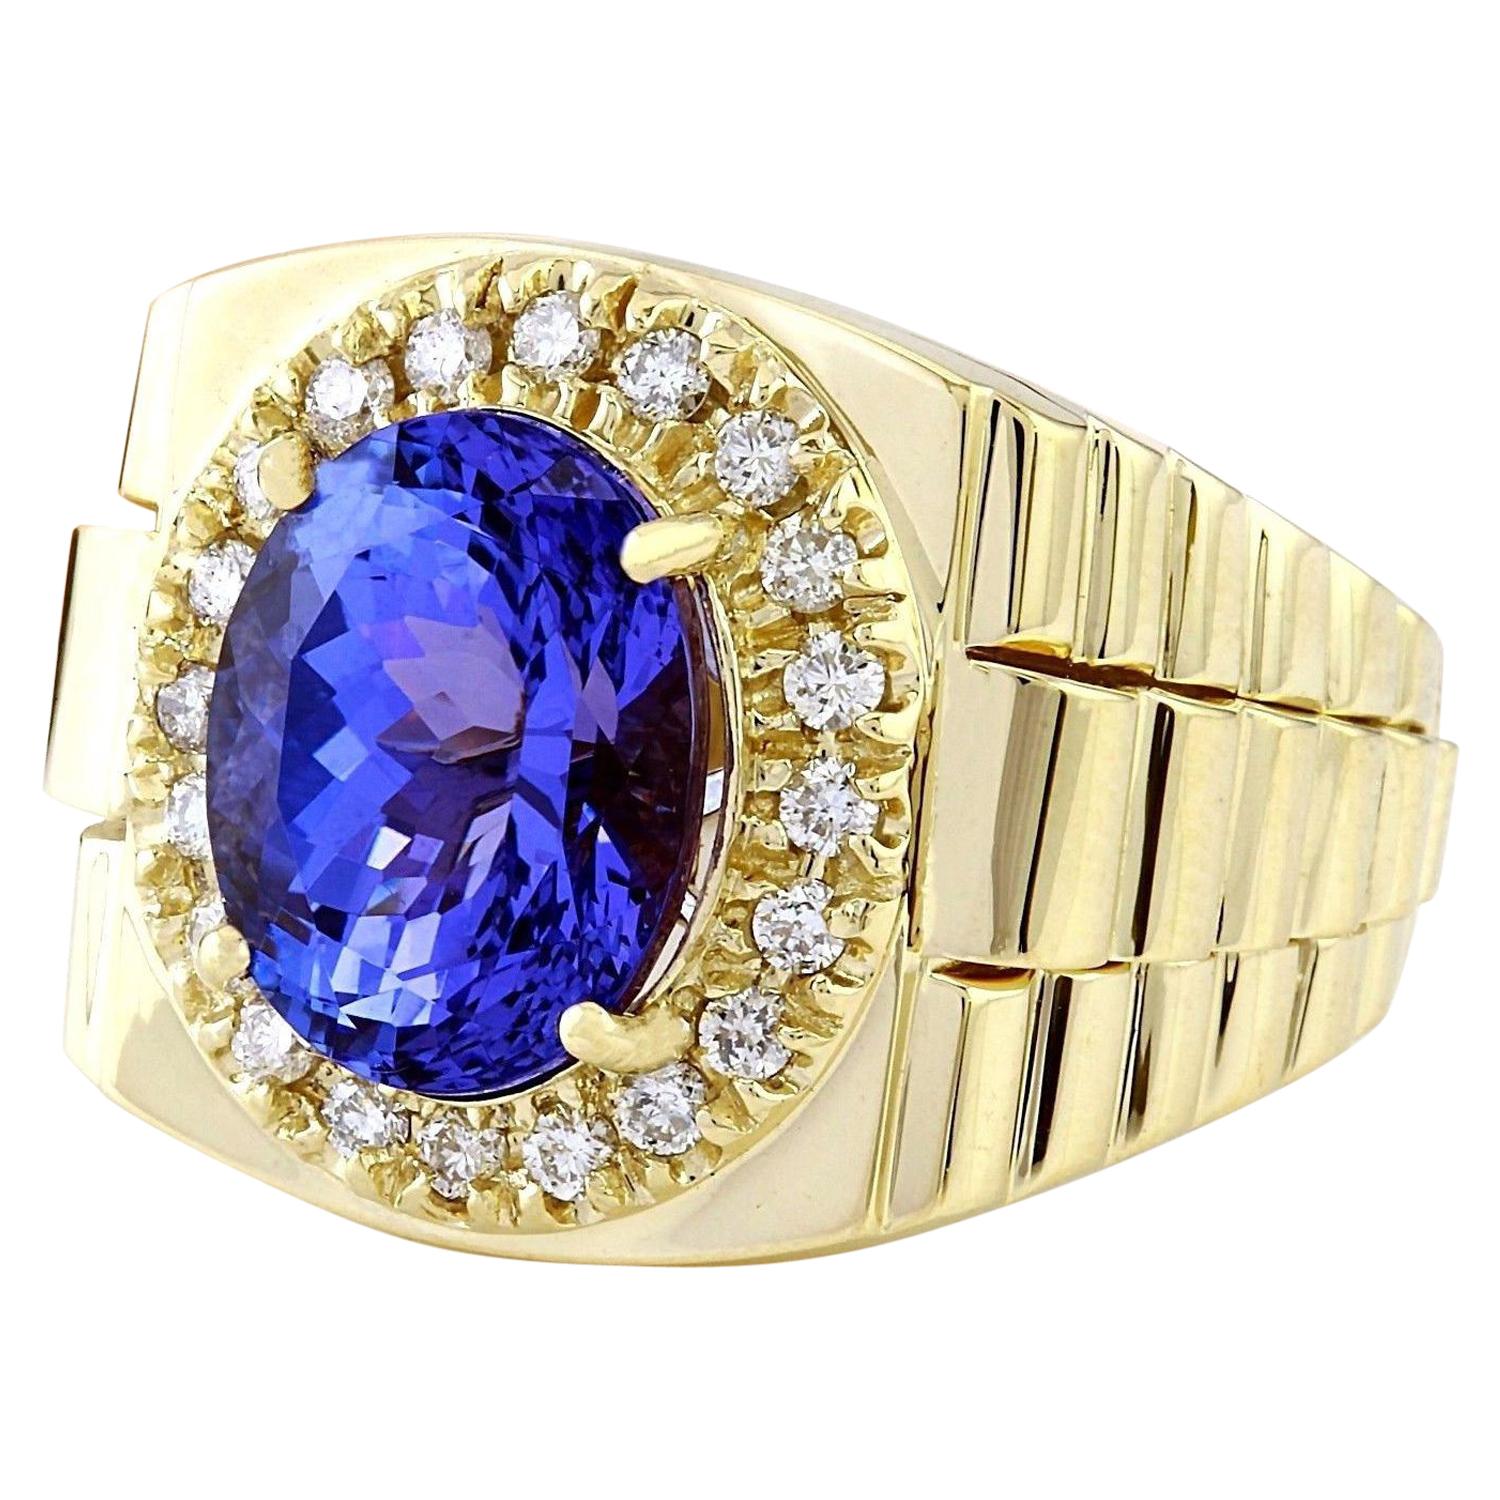 Introducing our distinguished 14K Solid Yellow Gold Diamond Ring, tailored for the discerning gentleman, boasting a commanding 8.06 Carat Tanzanite centerpiece. Meticulously crafted with precision, this ring exudes sophistication and strength. The